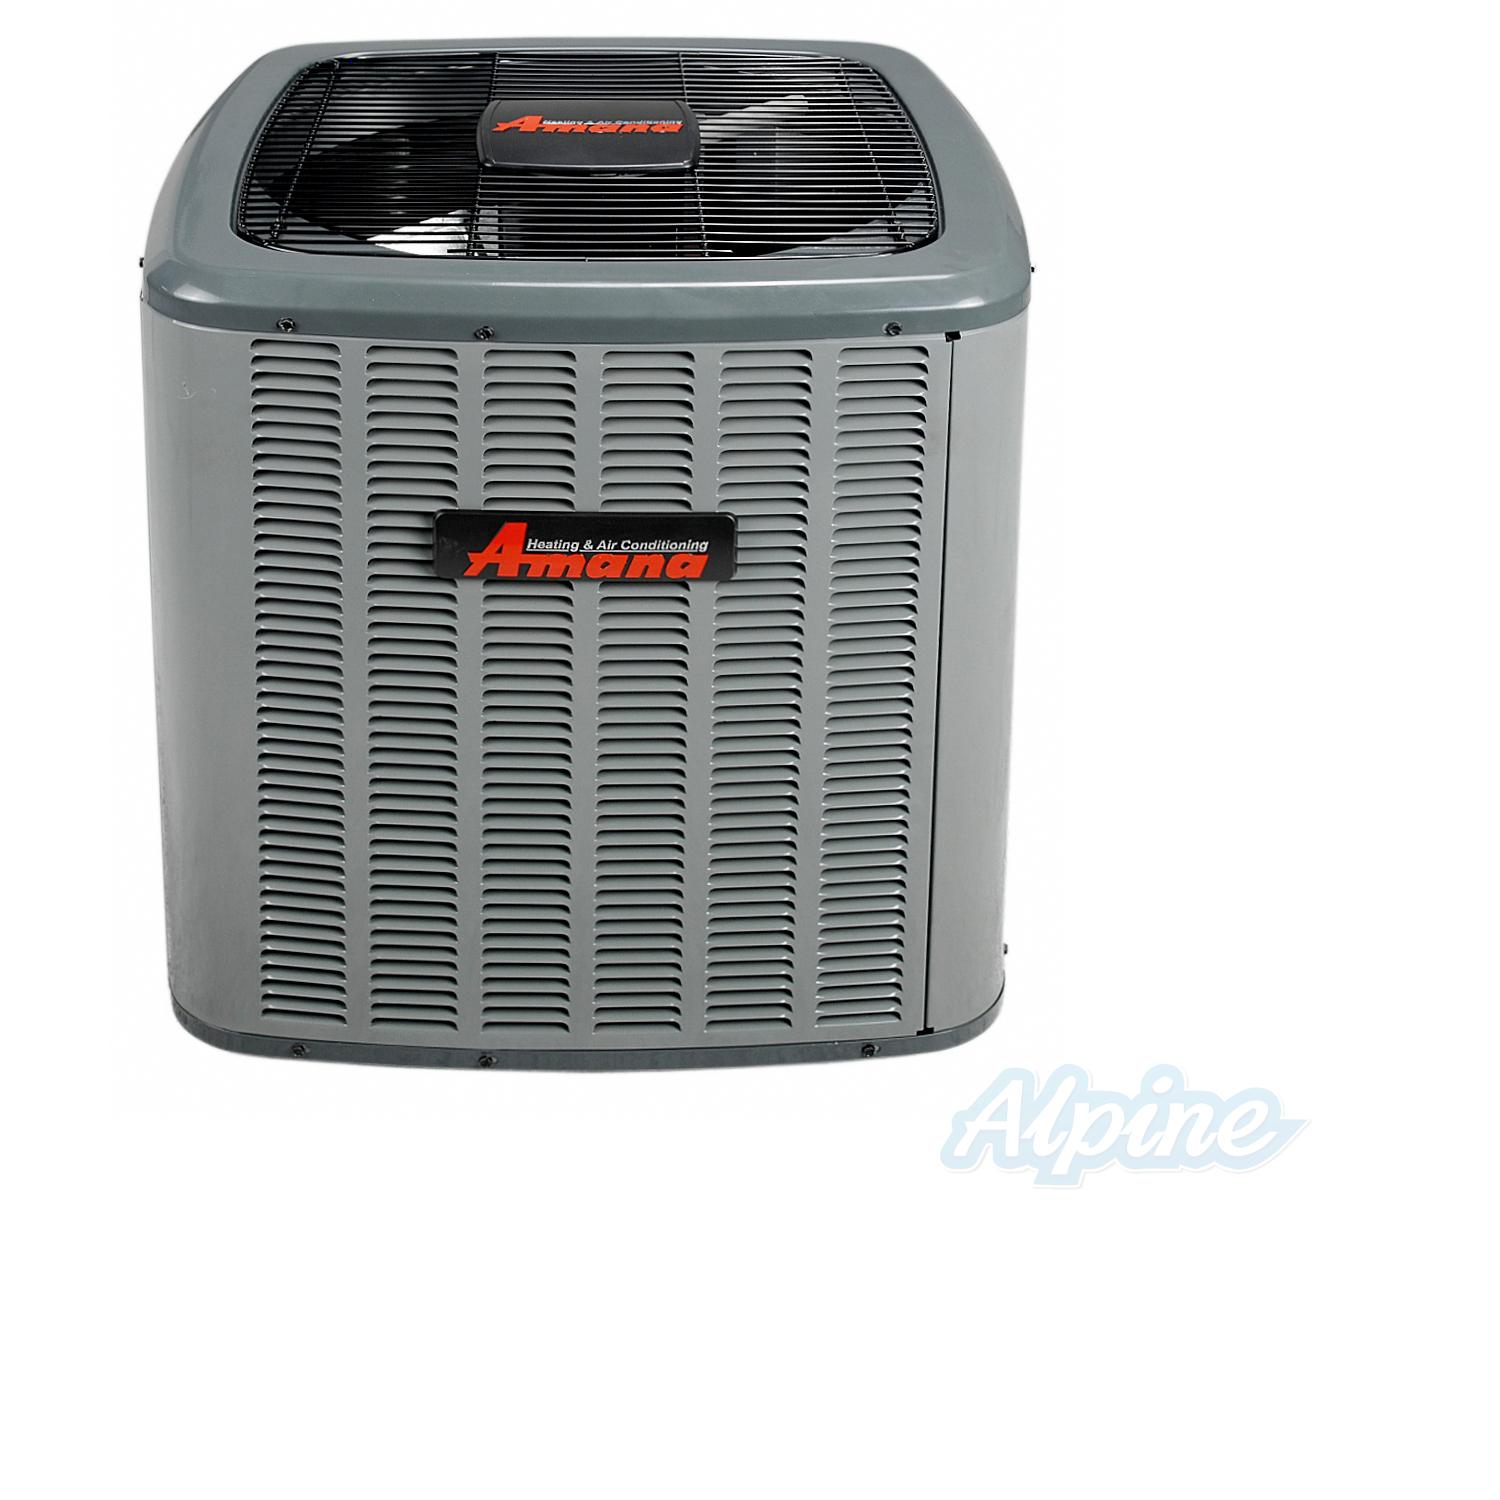 3-ton-amana-air-conditioner-10-best-amana-ideas-heating-and-air